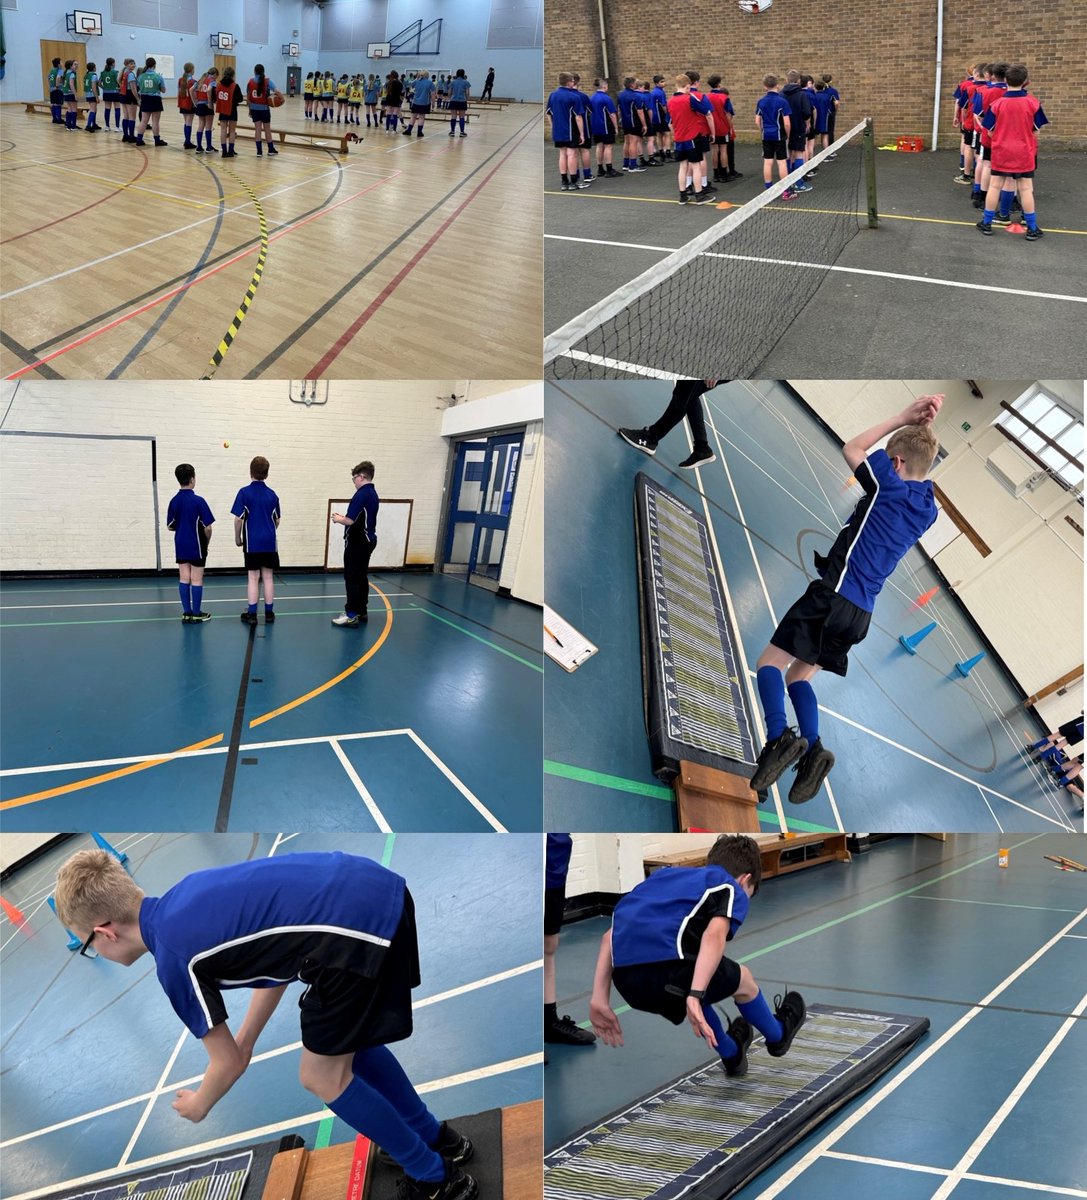 Year 7 interform competitions running this morning!
Well done to all participants. Excellent community spirit demonstrated by all!
@The_CTA_Way #TheCTAWay #CTA_PE #Community #Tenacity #Aspiration